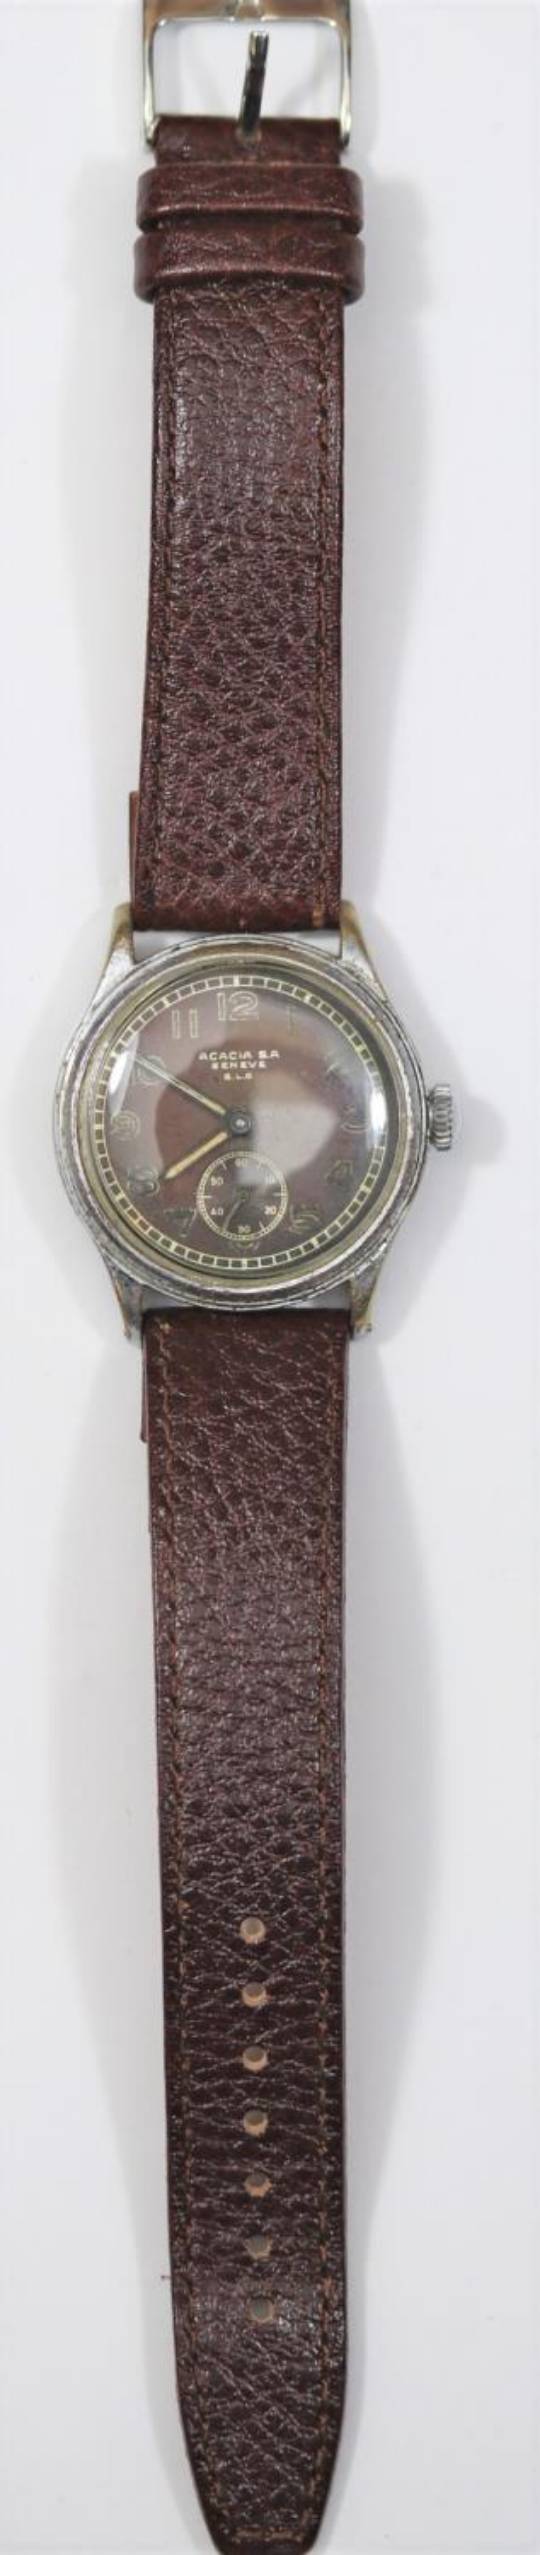 Acacia S.A wristwatch. Serial number 947. Plated case, wear to plating, 32mm without crown. Fixed